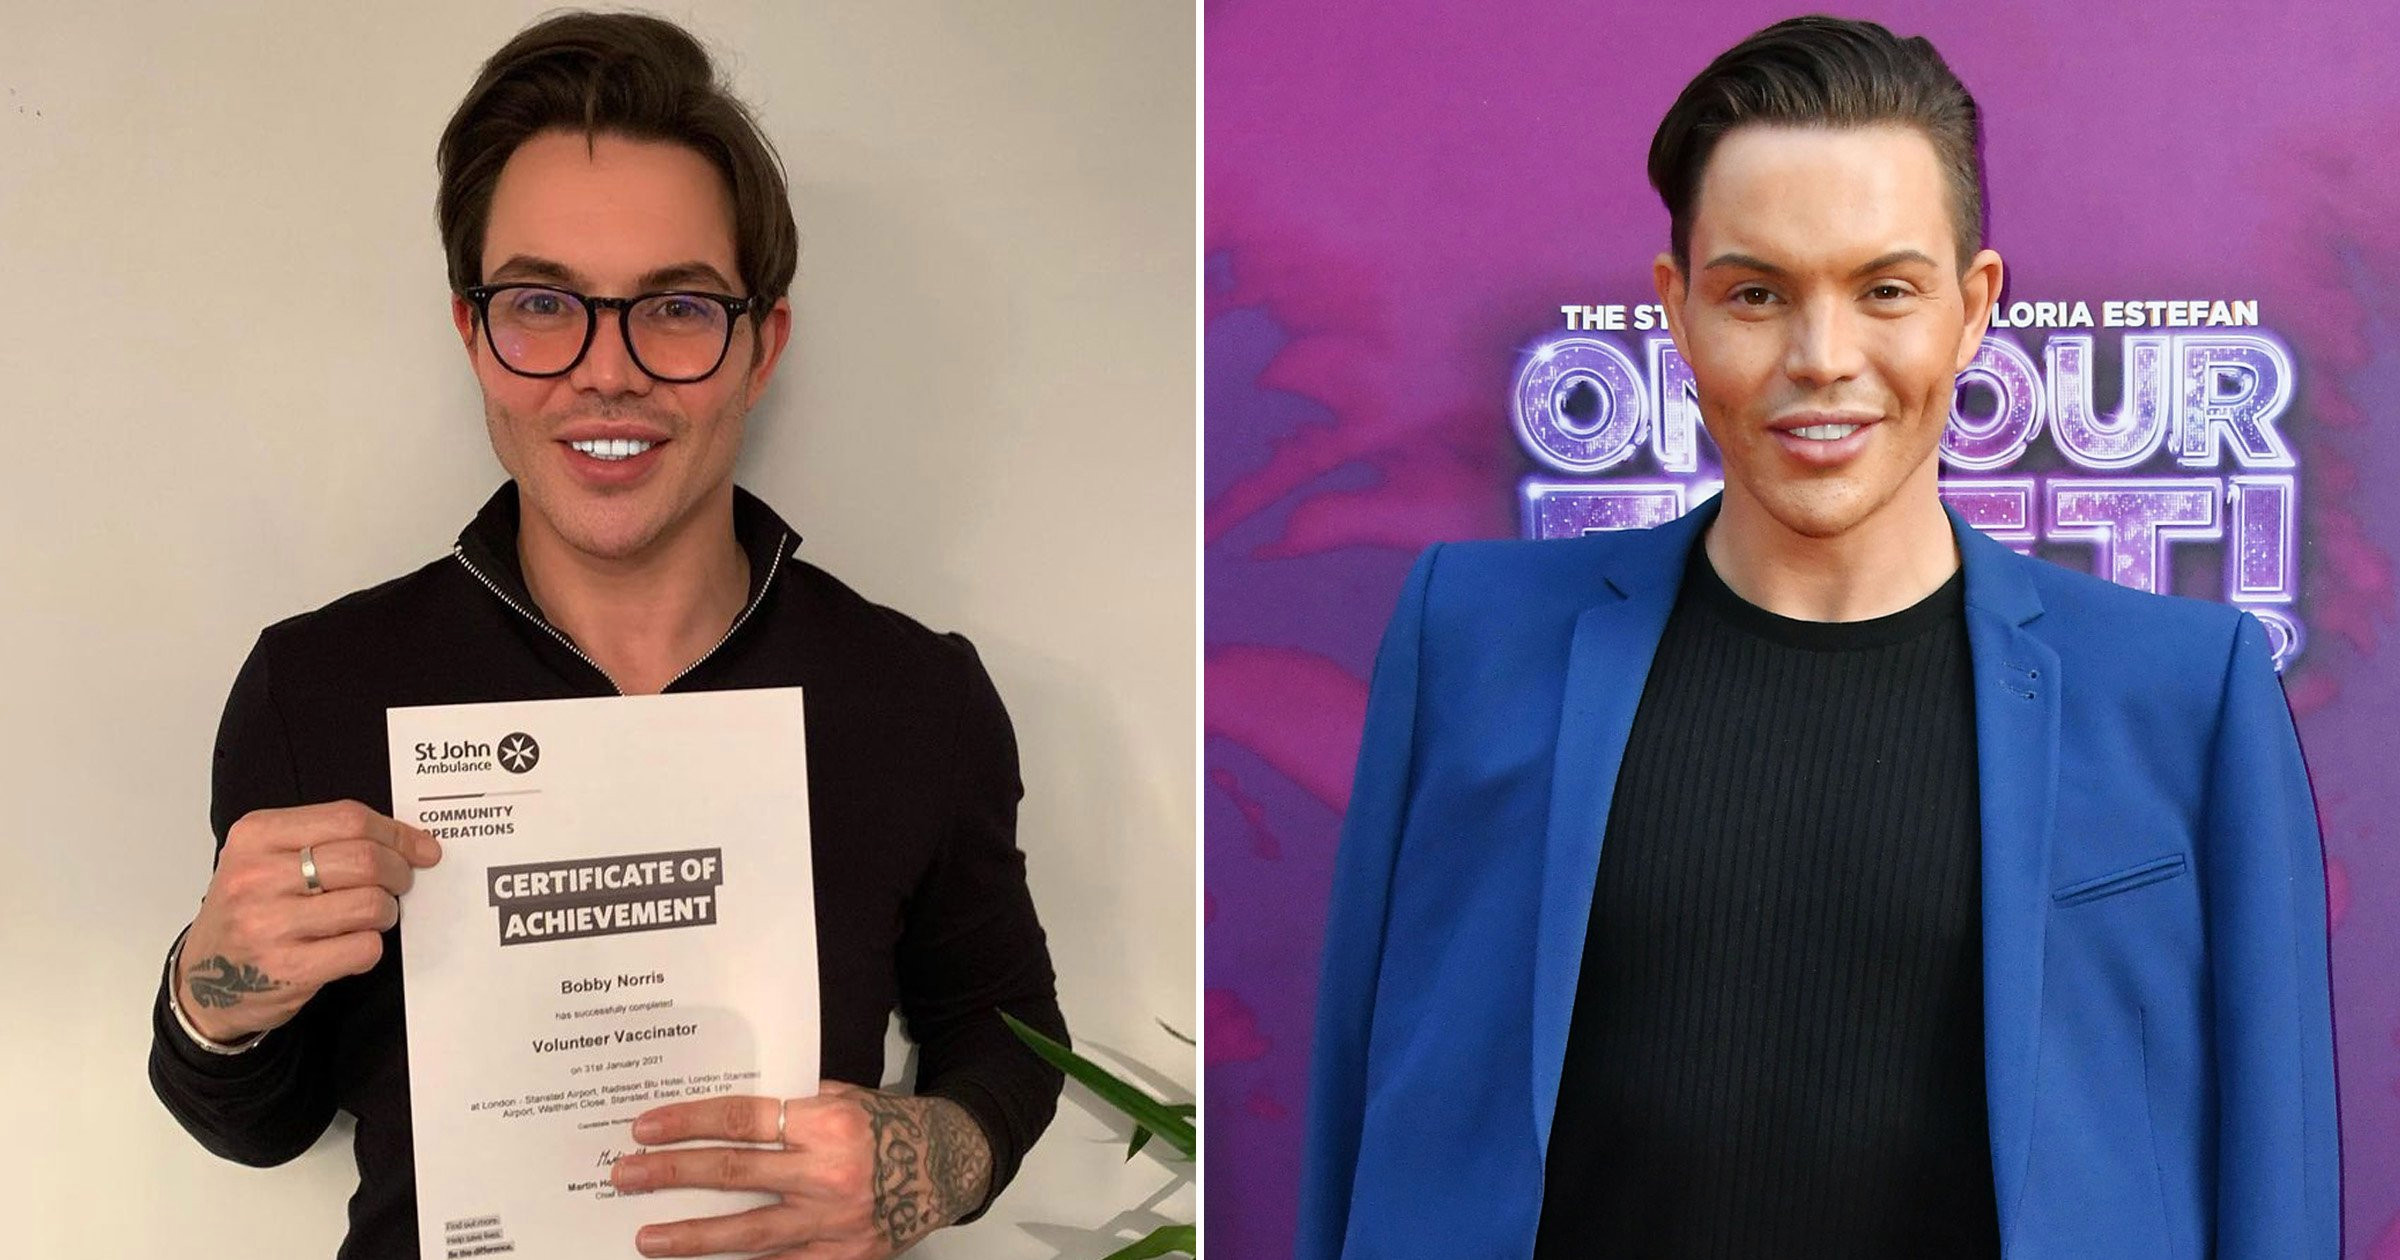 Towie’s Bobby Norris becomes Covid-19 vaccinator after completing training